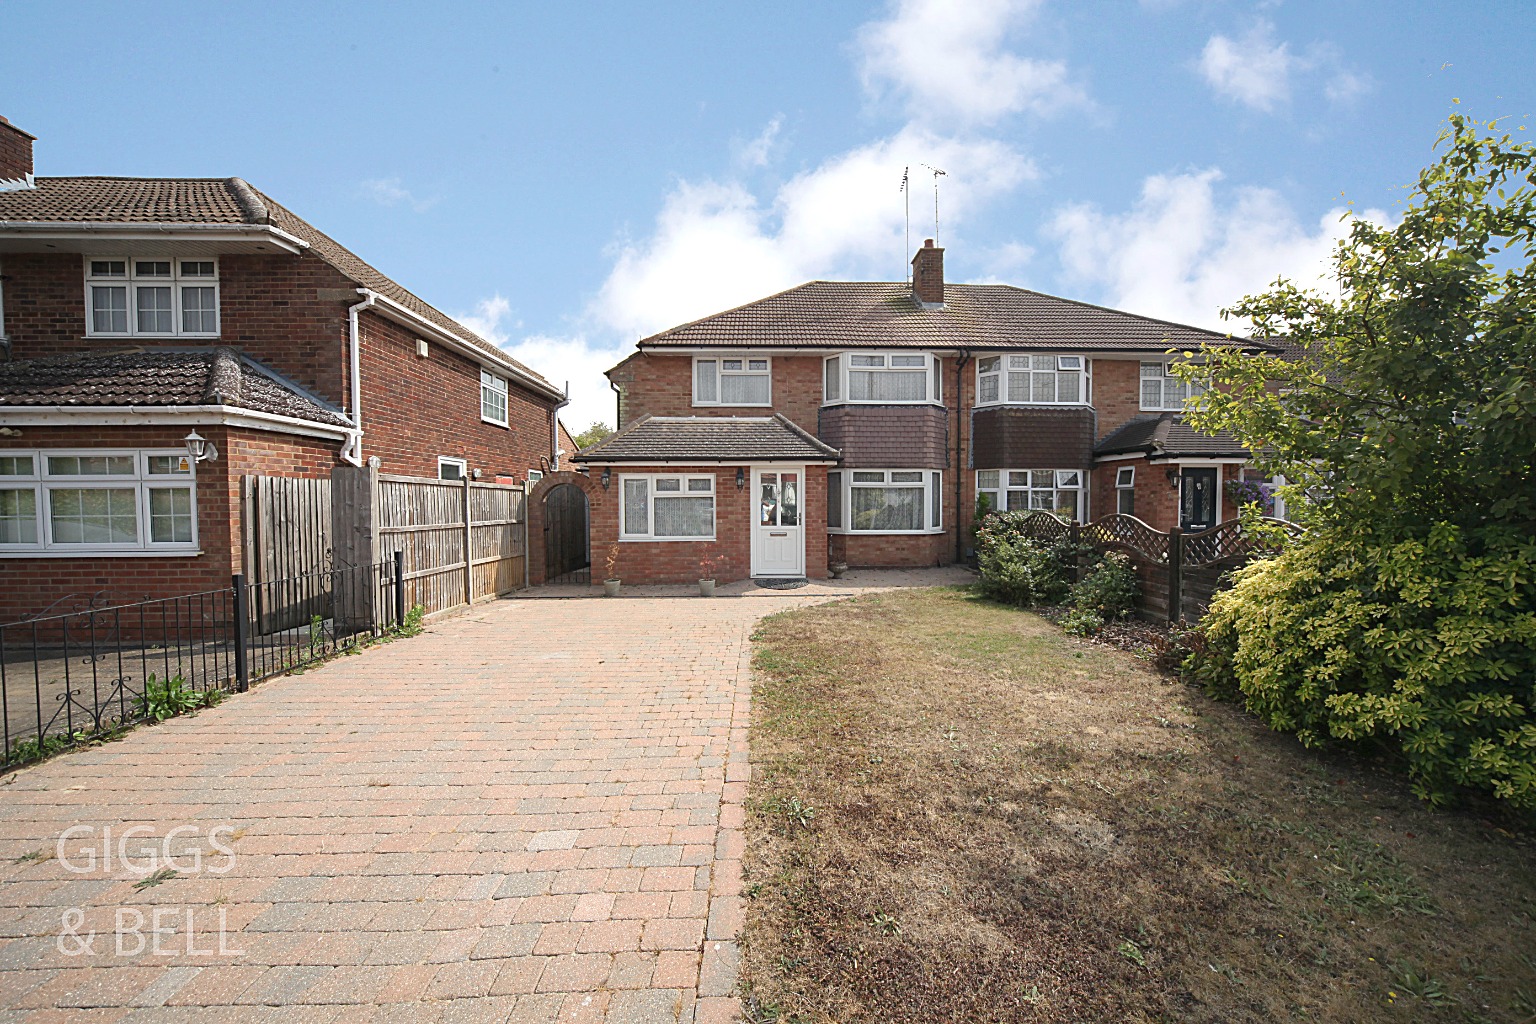 4 bed semi-detached house for sale in Curlew Road, Luton - Property Image 1